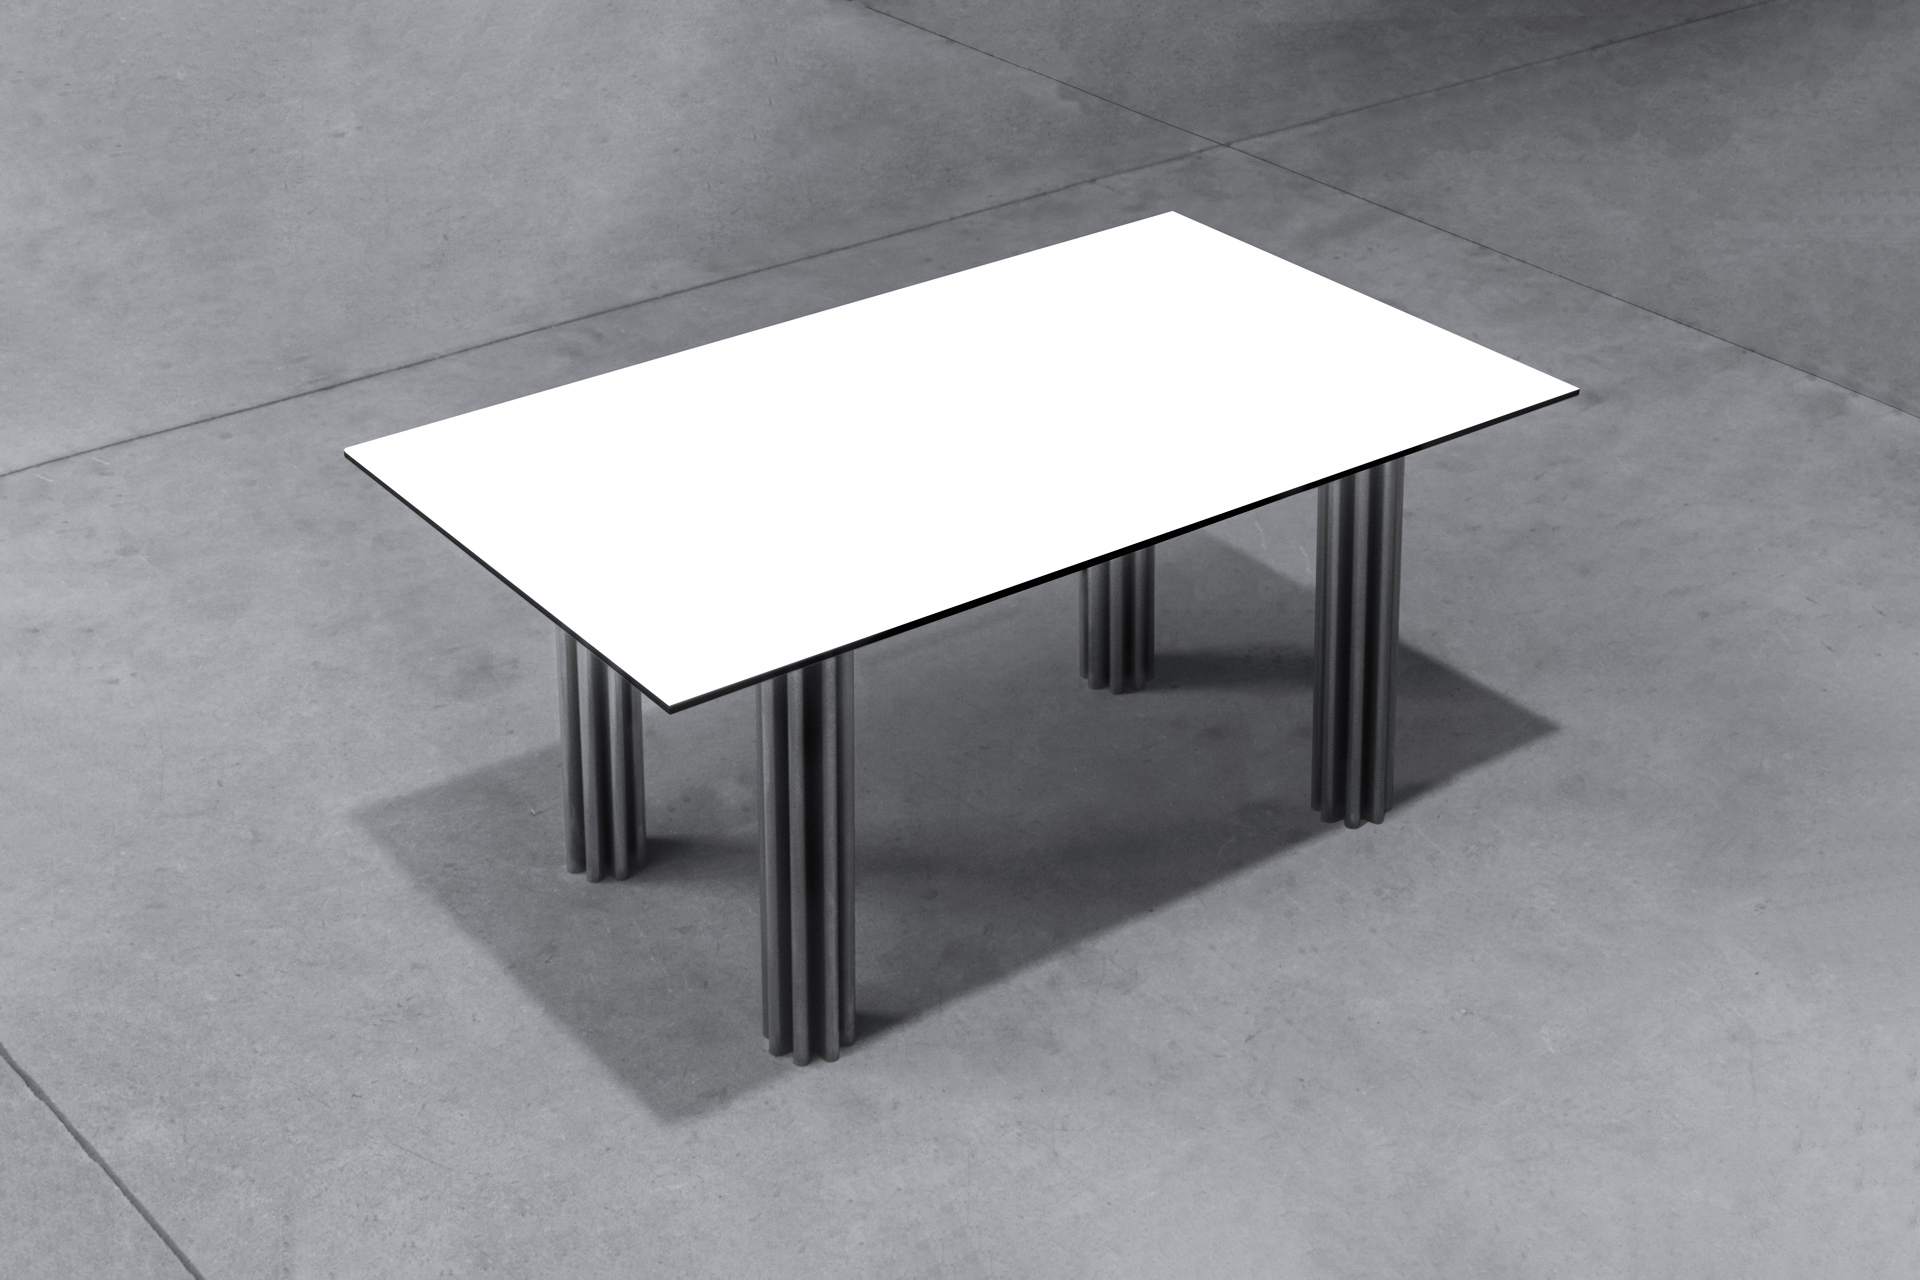 Temper table, made in italy, handmade objects